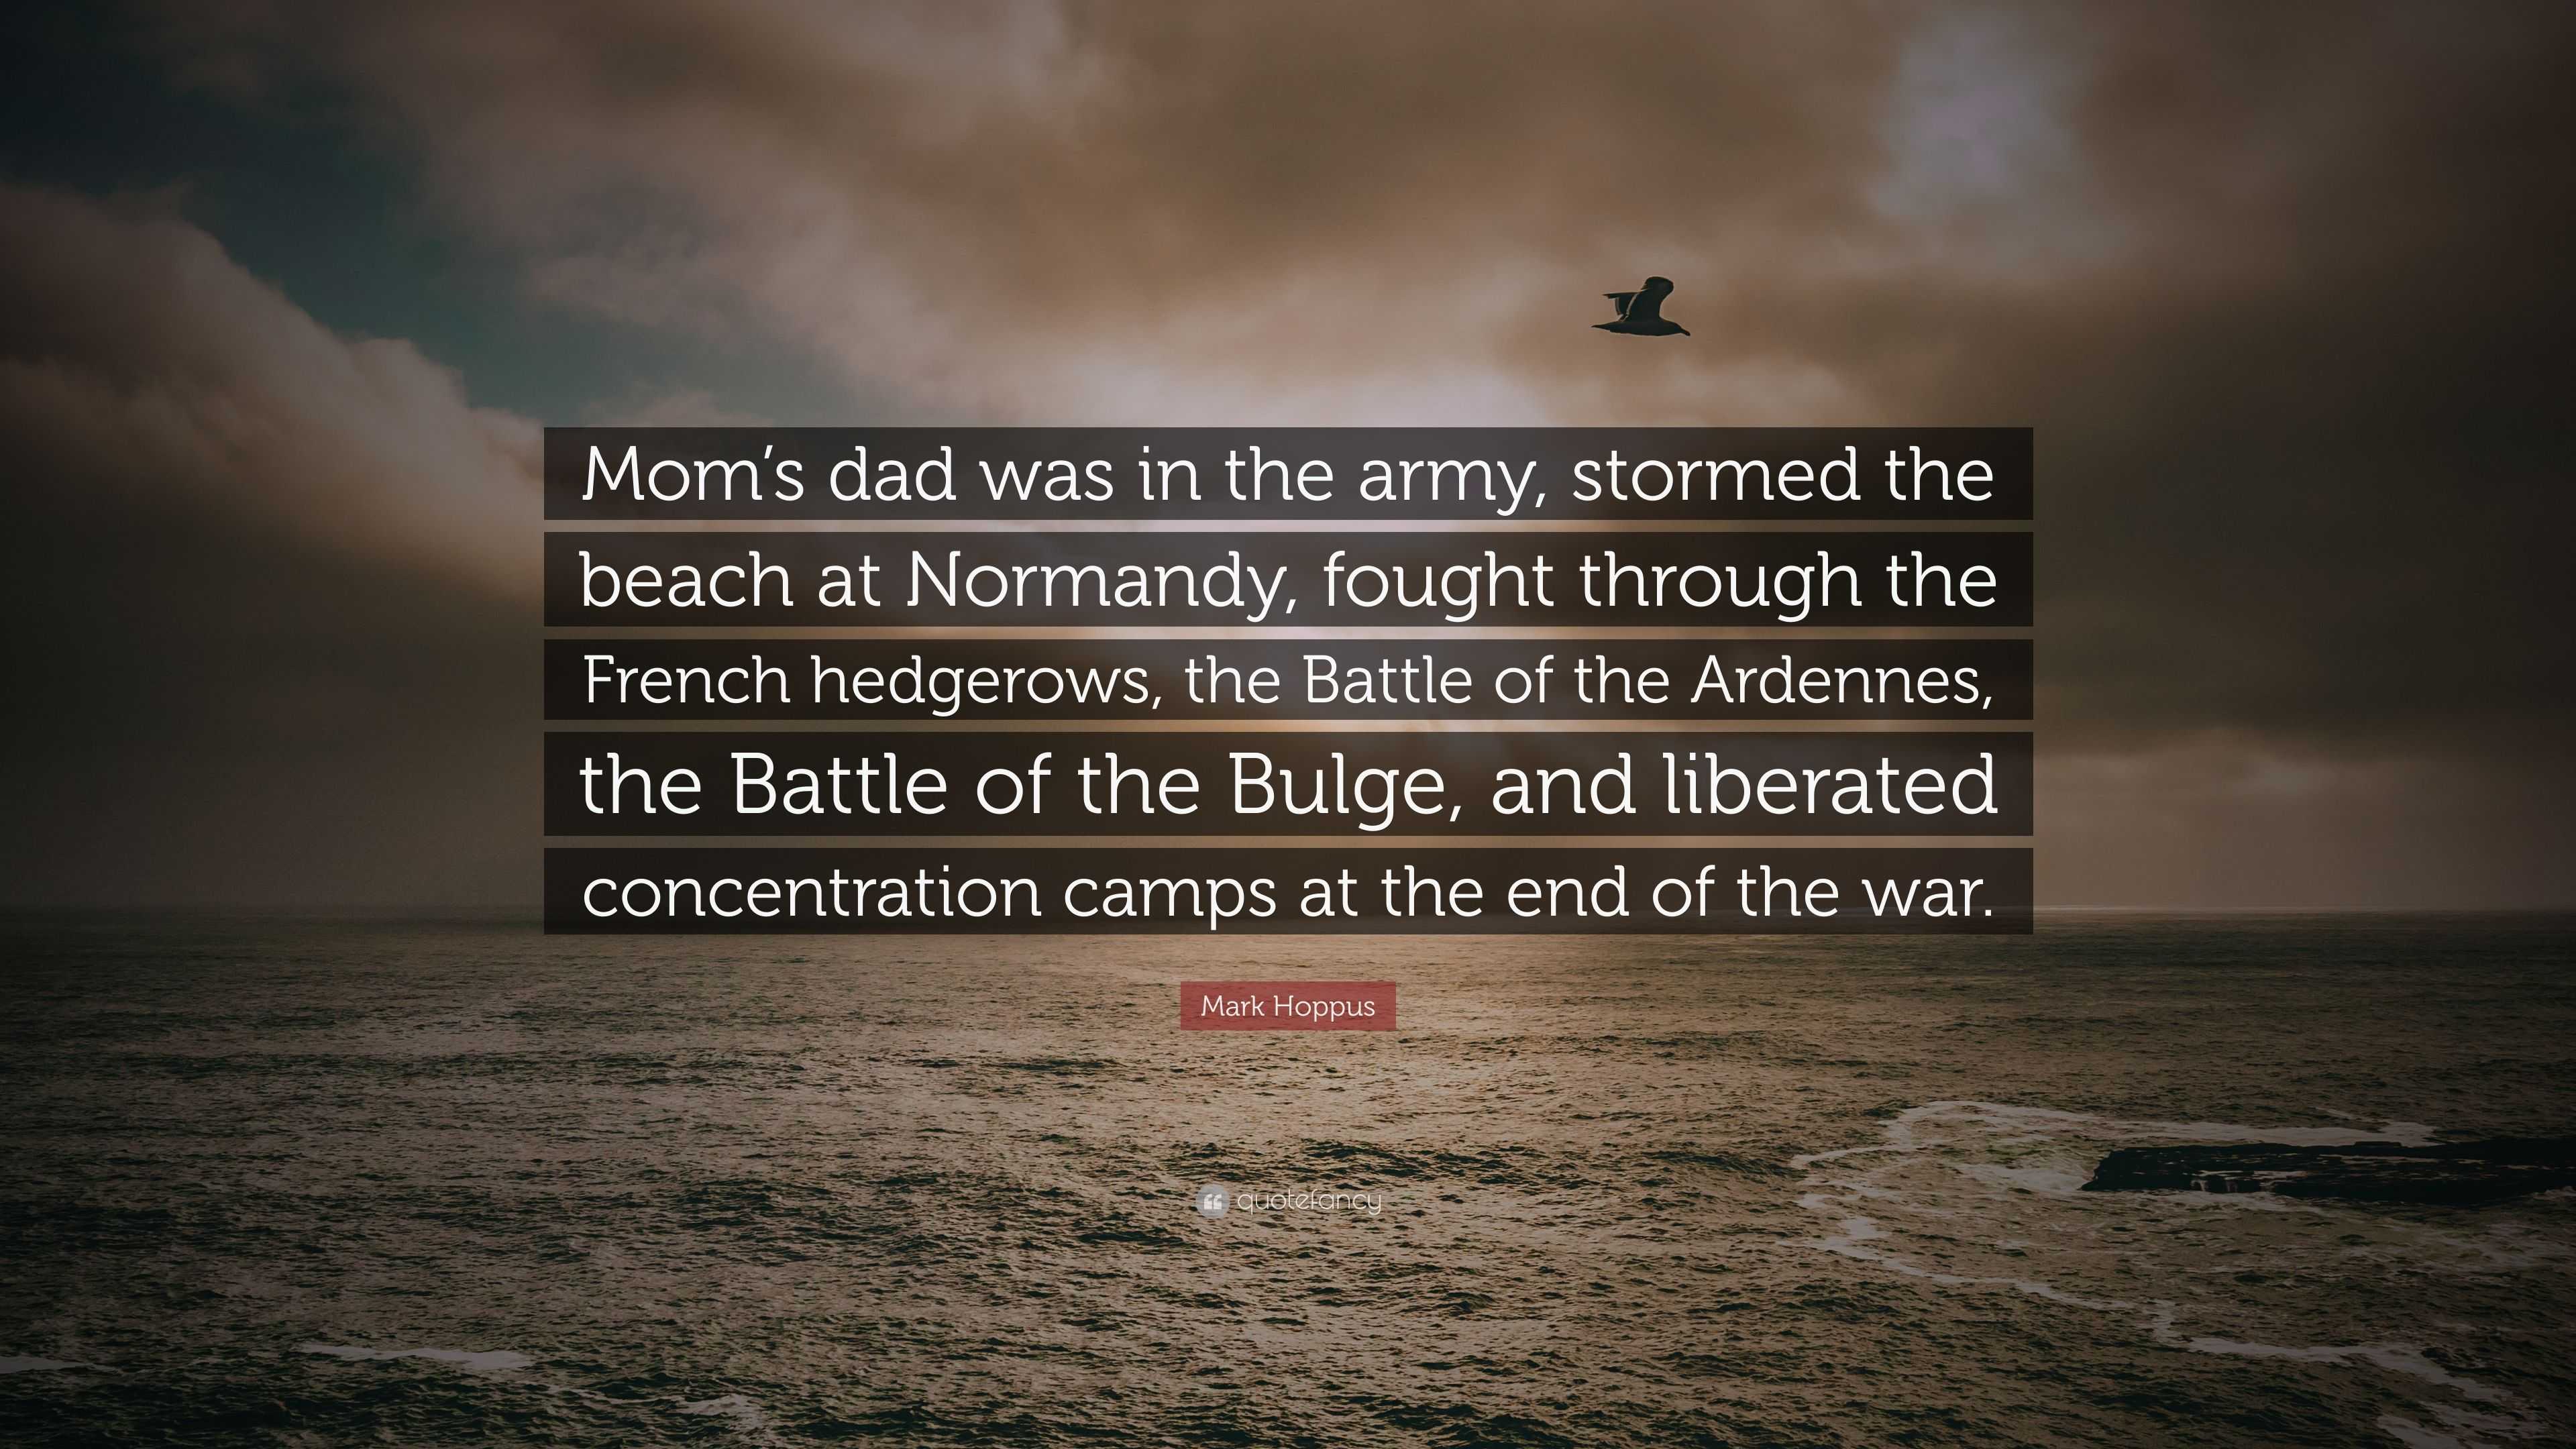 Mark Hoppus Quote: “Mom's Dad Was In The Army, Stormed The Beach At Normandy, Fought Through The French Hedgerows, The Battle Of The Ardenne...”